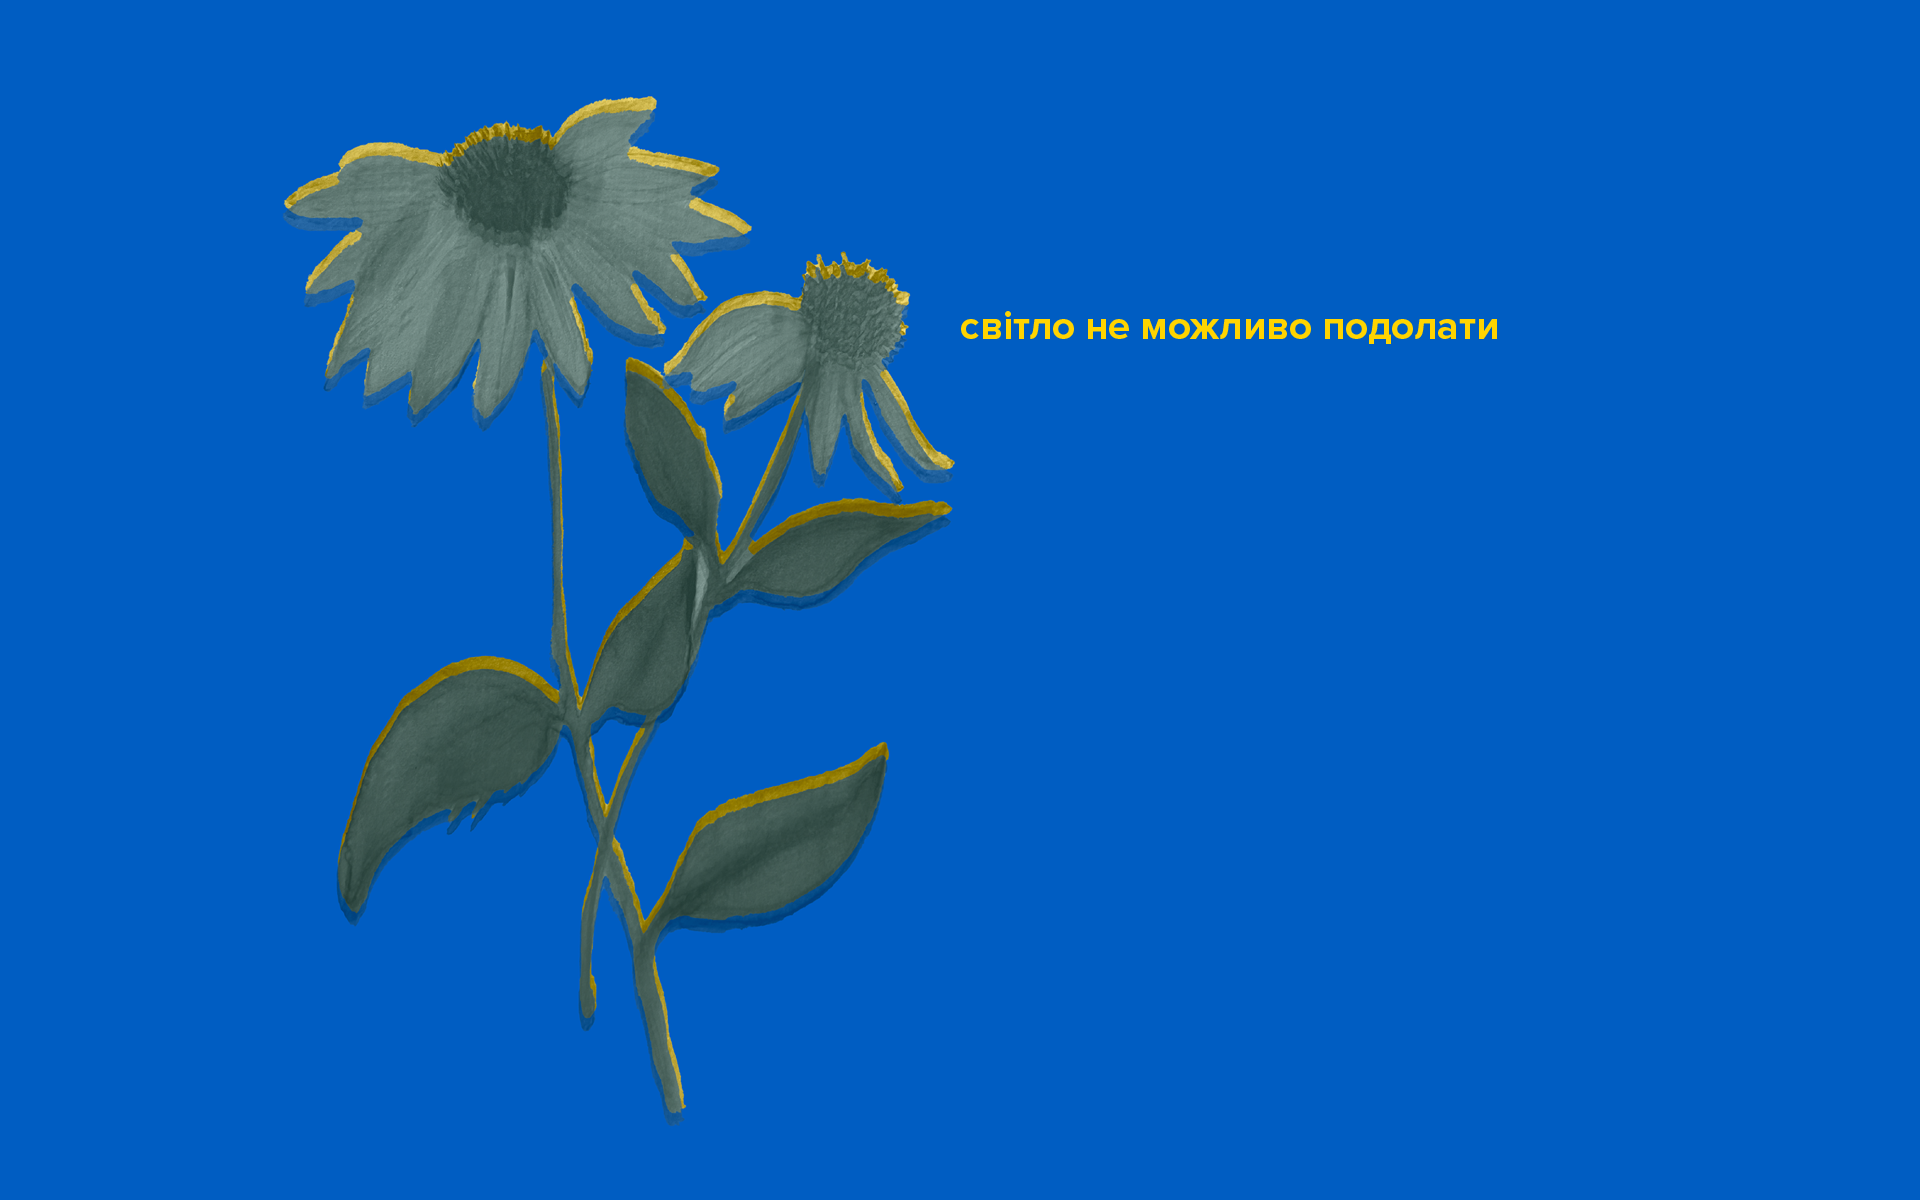 Graphic of sunflowers with text in Ukranian